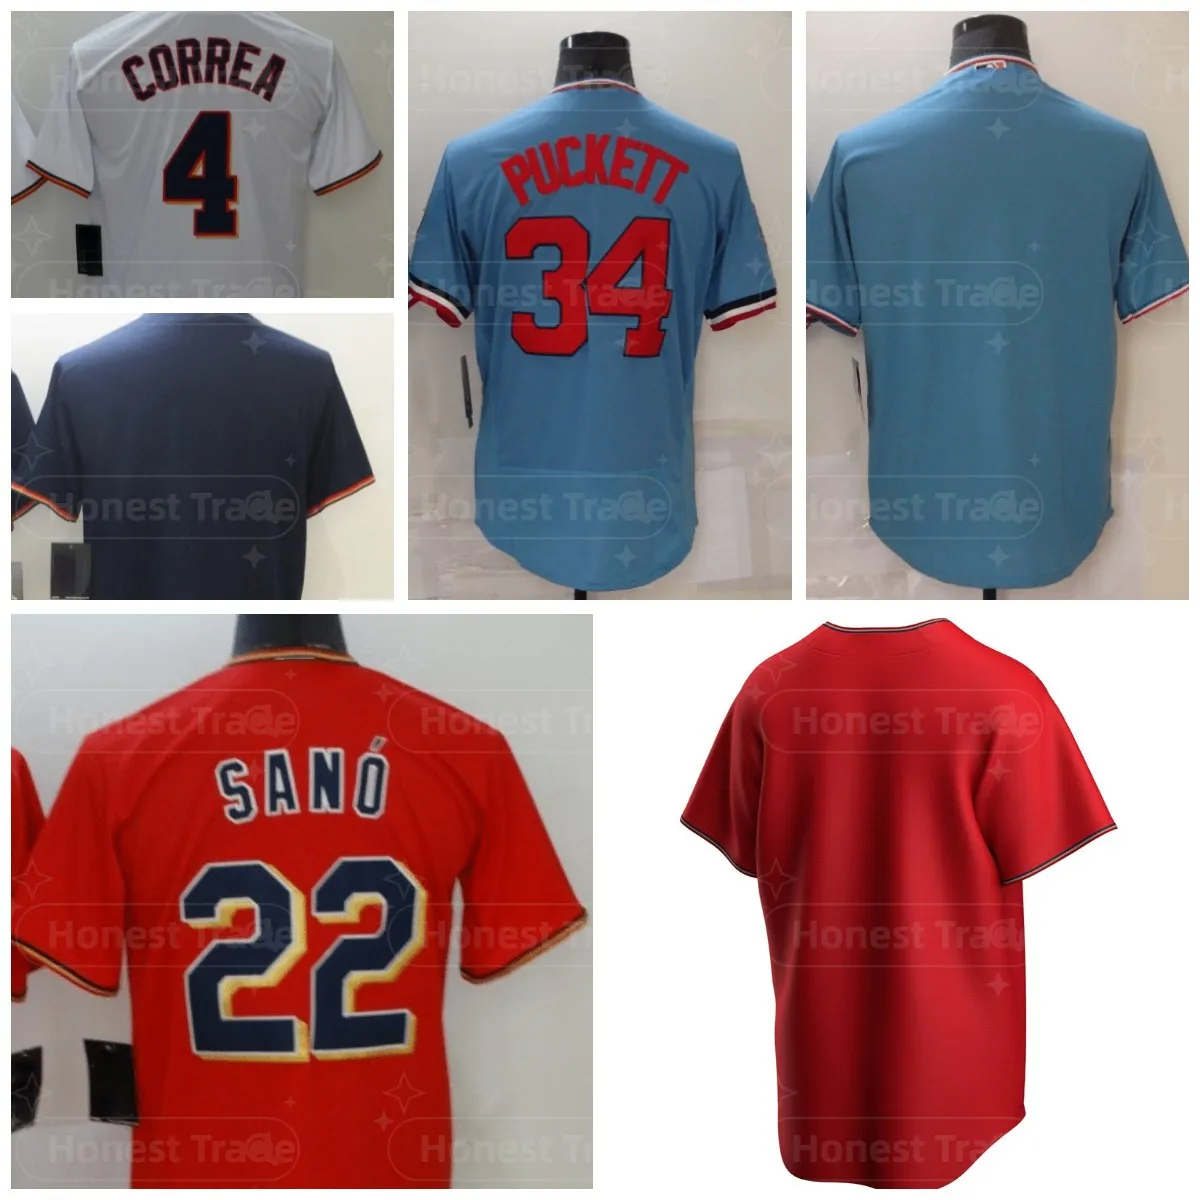 34 Kirby Puckett Men Baseball Jersey Blue 22 Miguel Sano Red Carlos 4 Correa Minn Blank Jersey Quality Embroidered Shirts Tシャツ